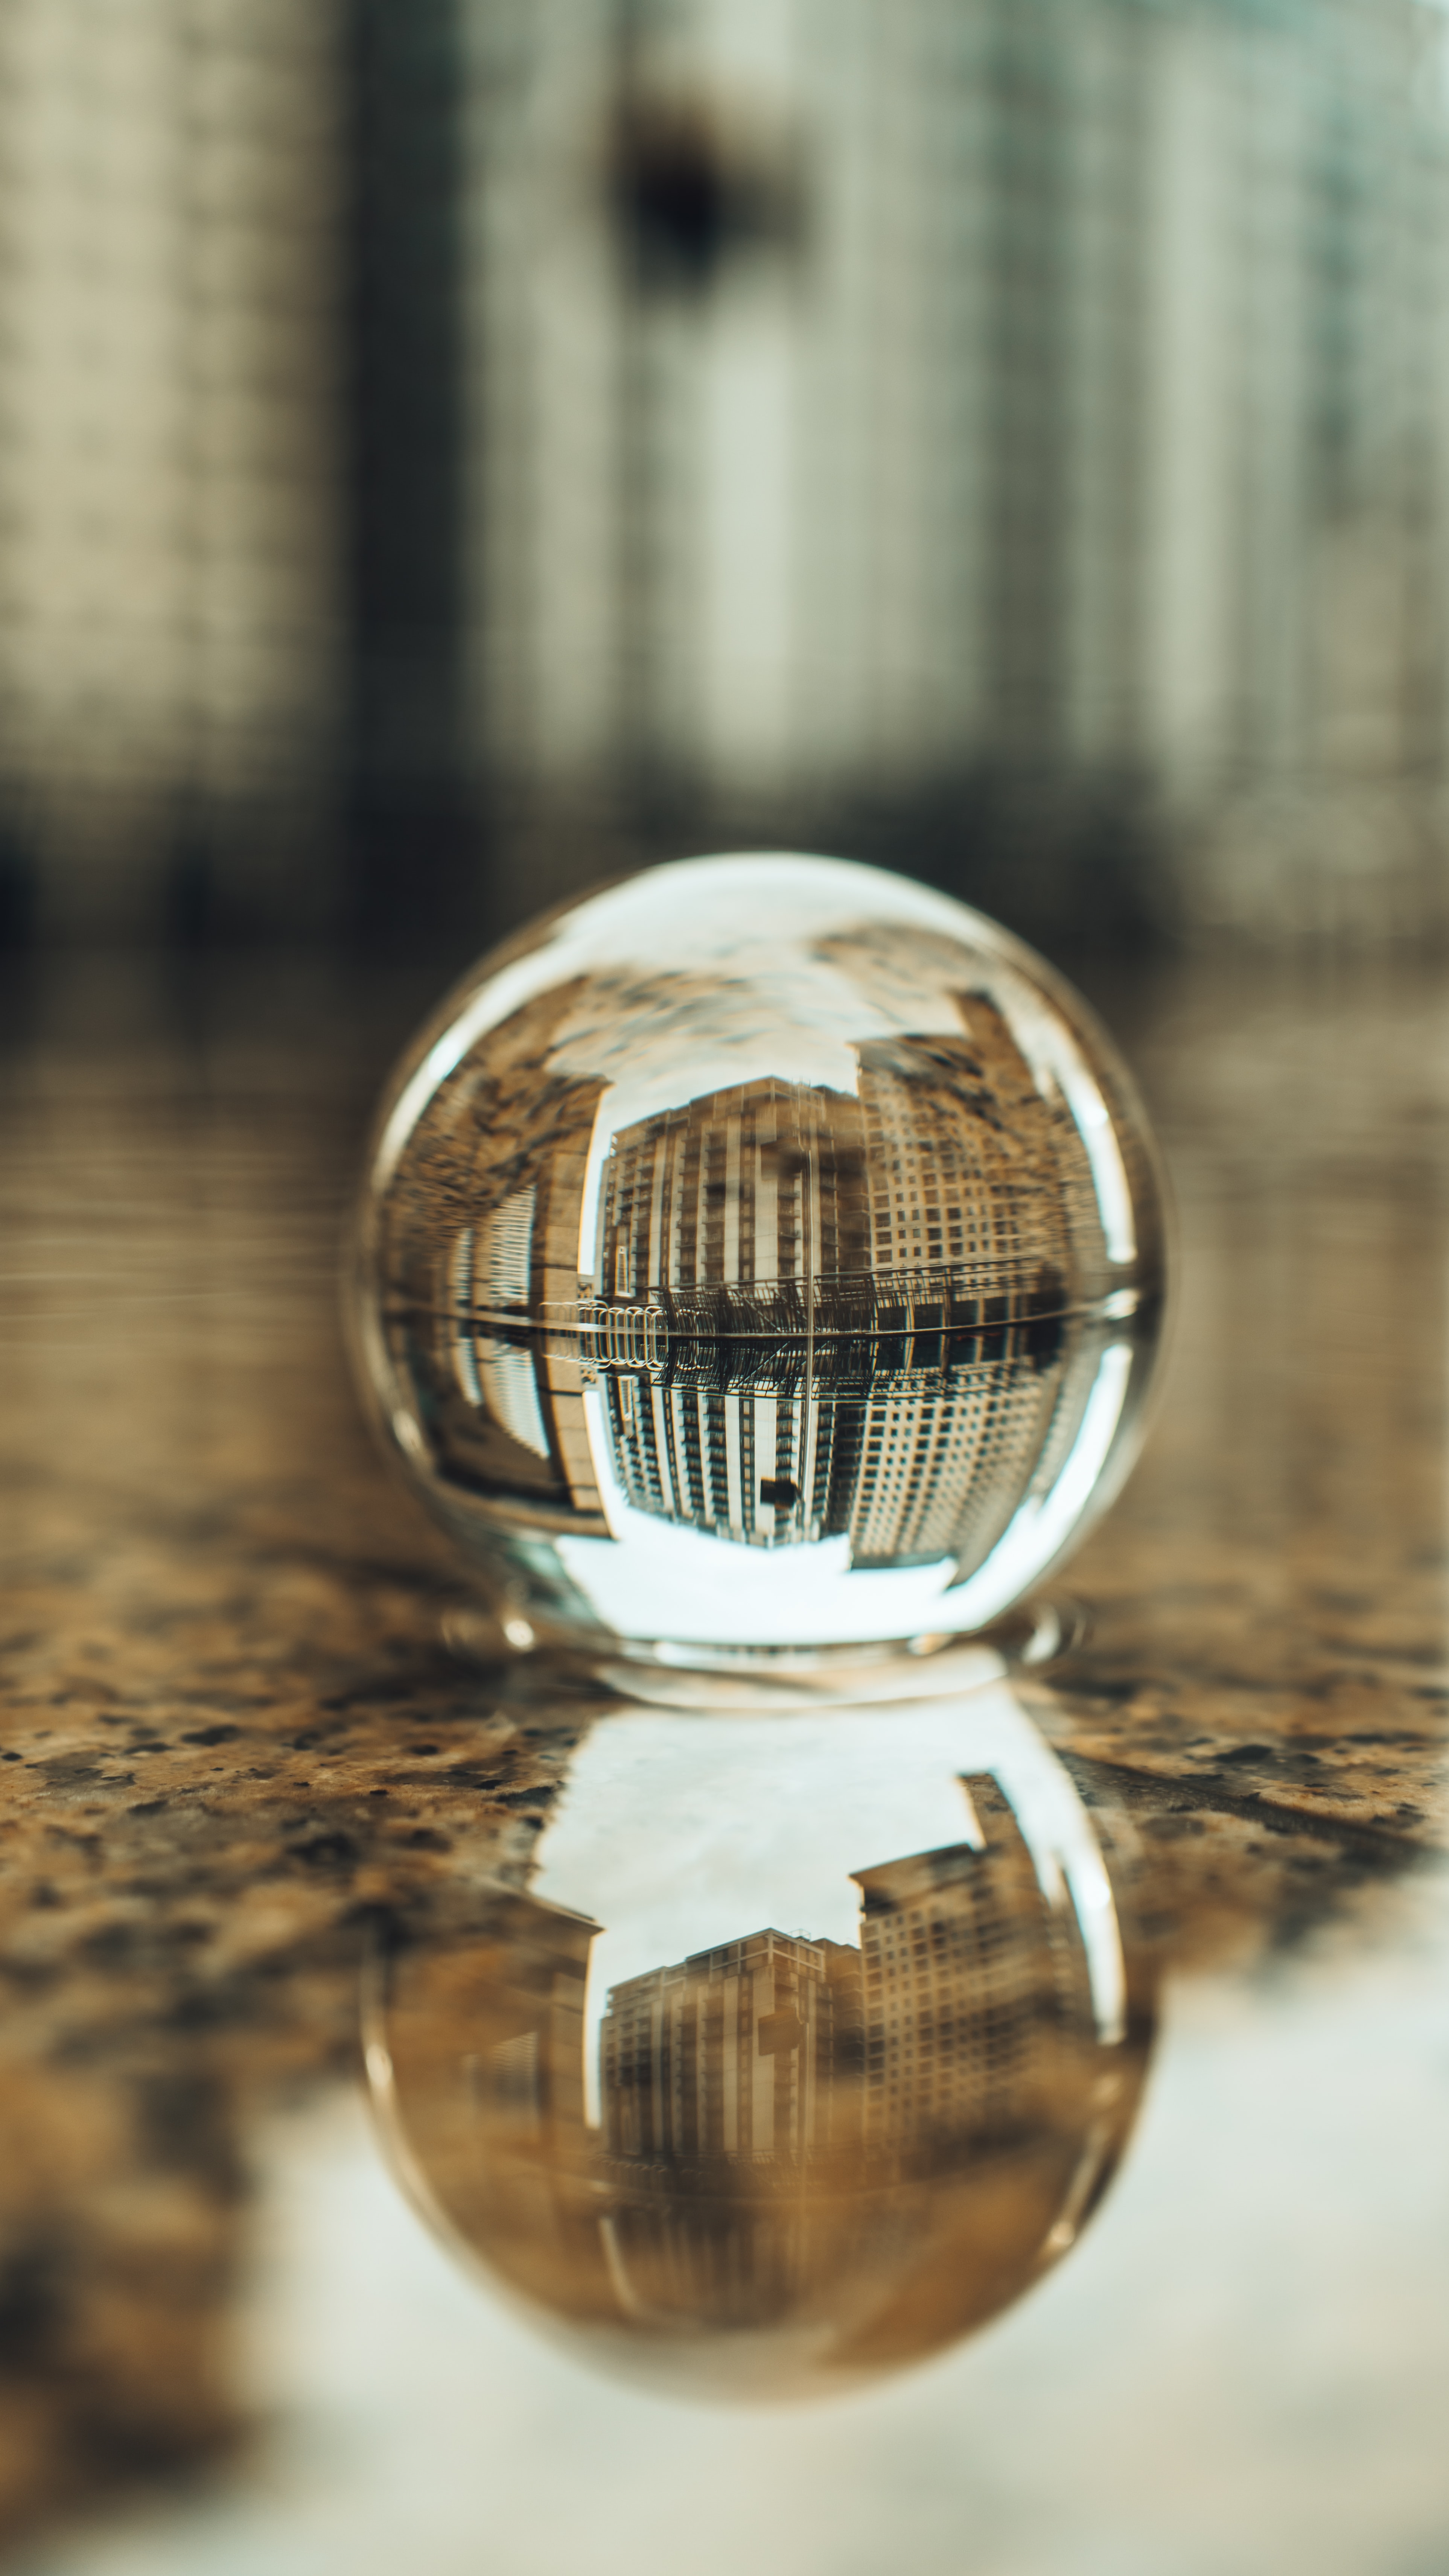 android crystal ball, water, building, reflection, miscellanea, miscellaneous, ball